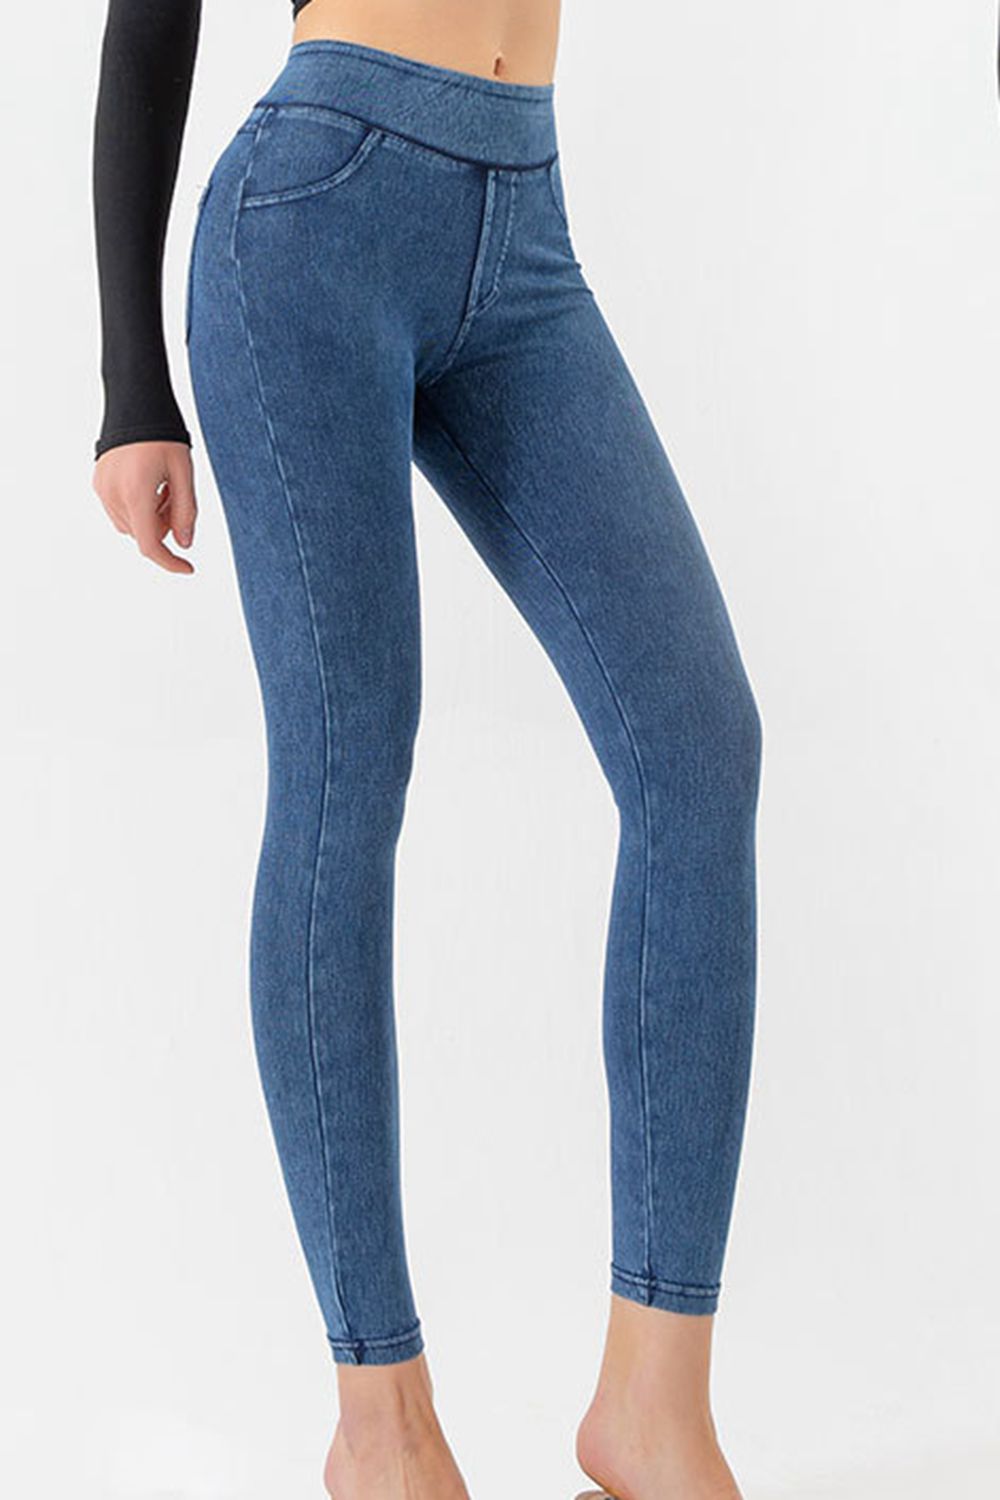 High Waist Skinny Jeans Print on any thing USA/STOD clothes